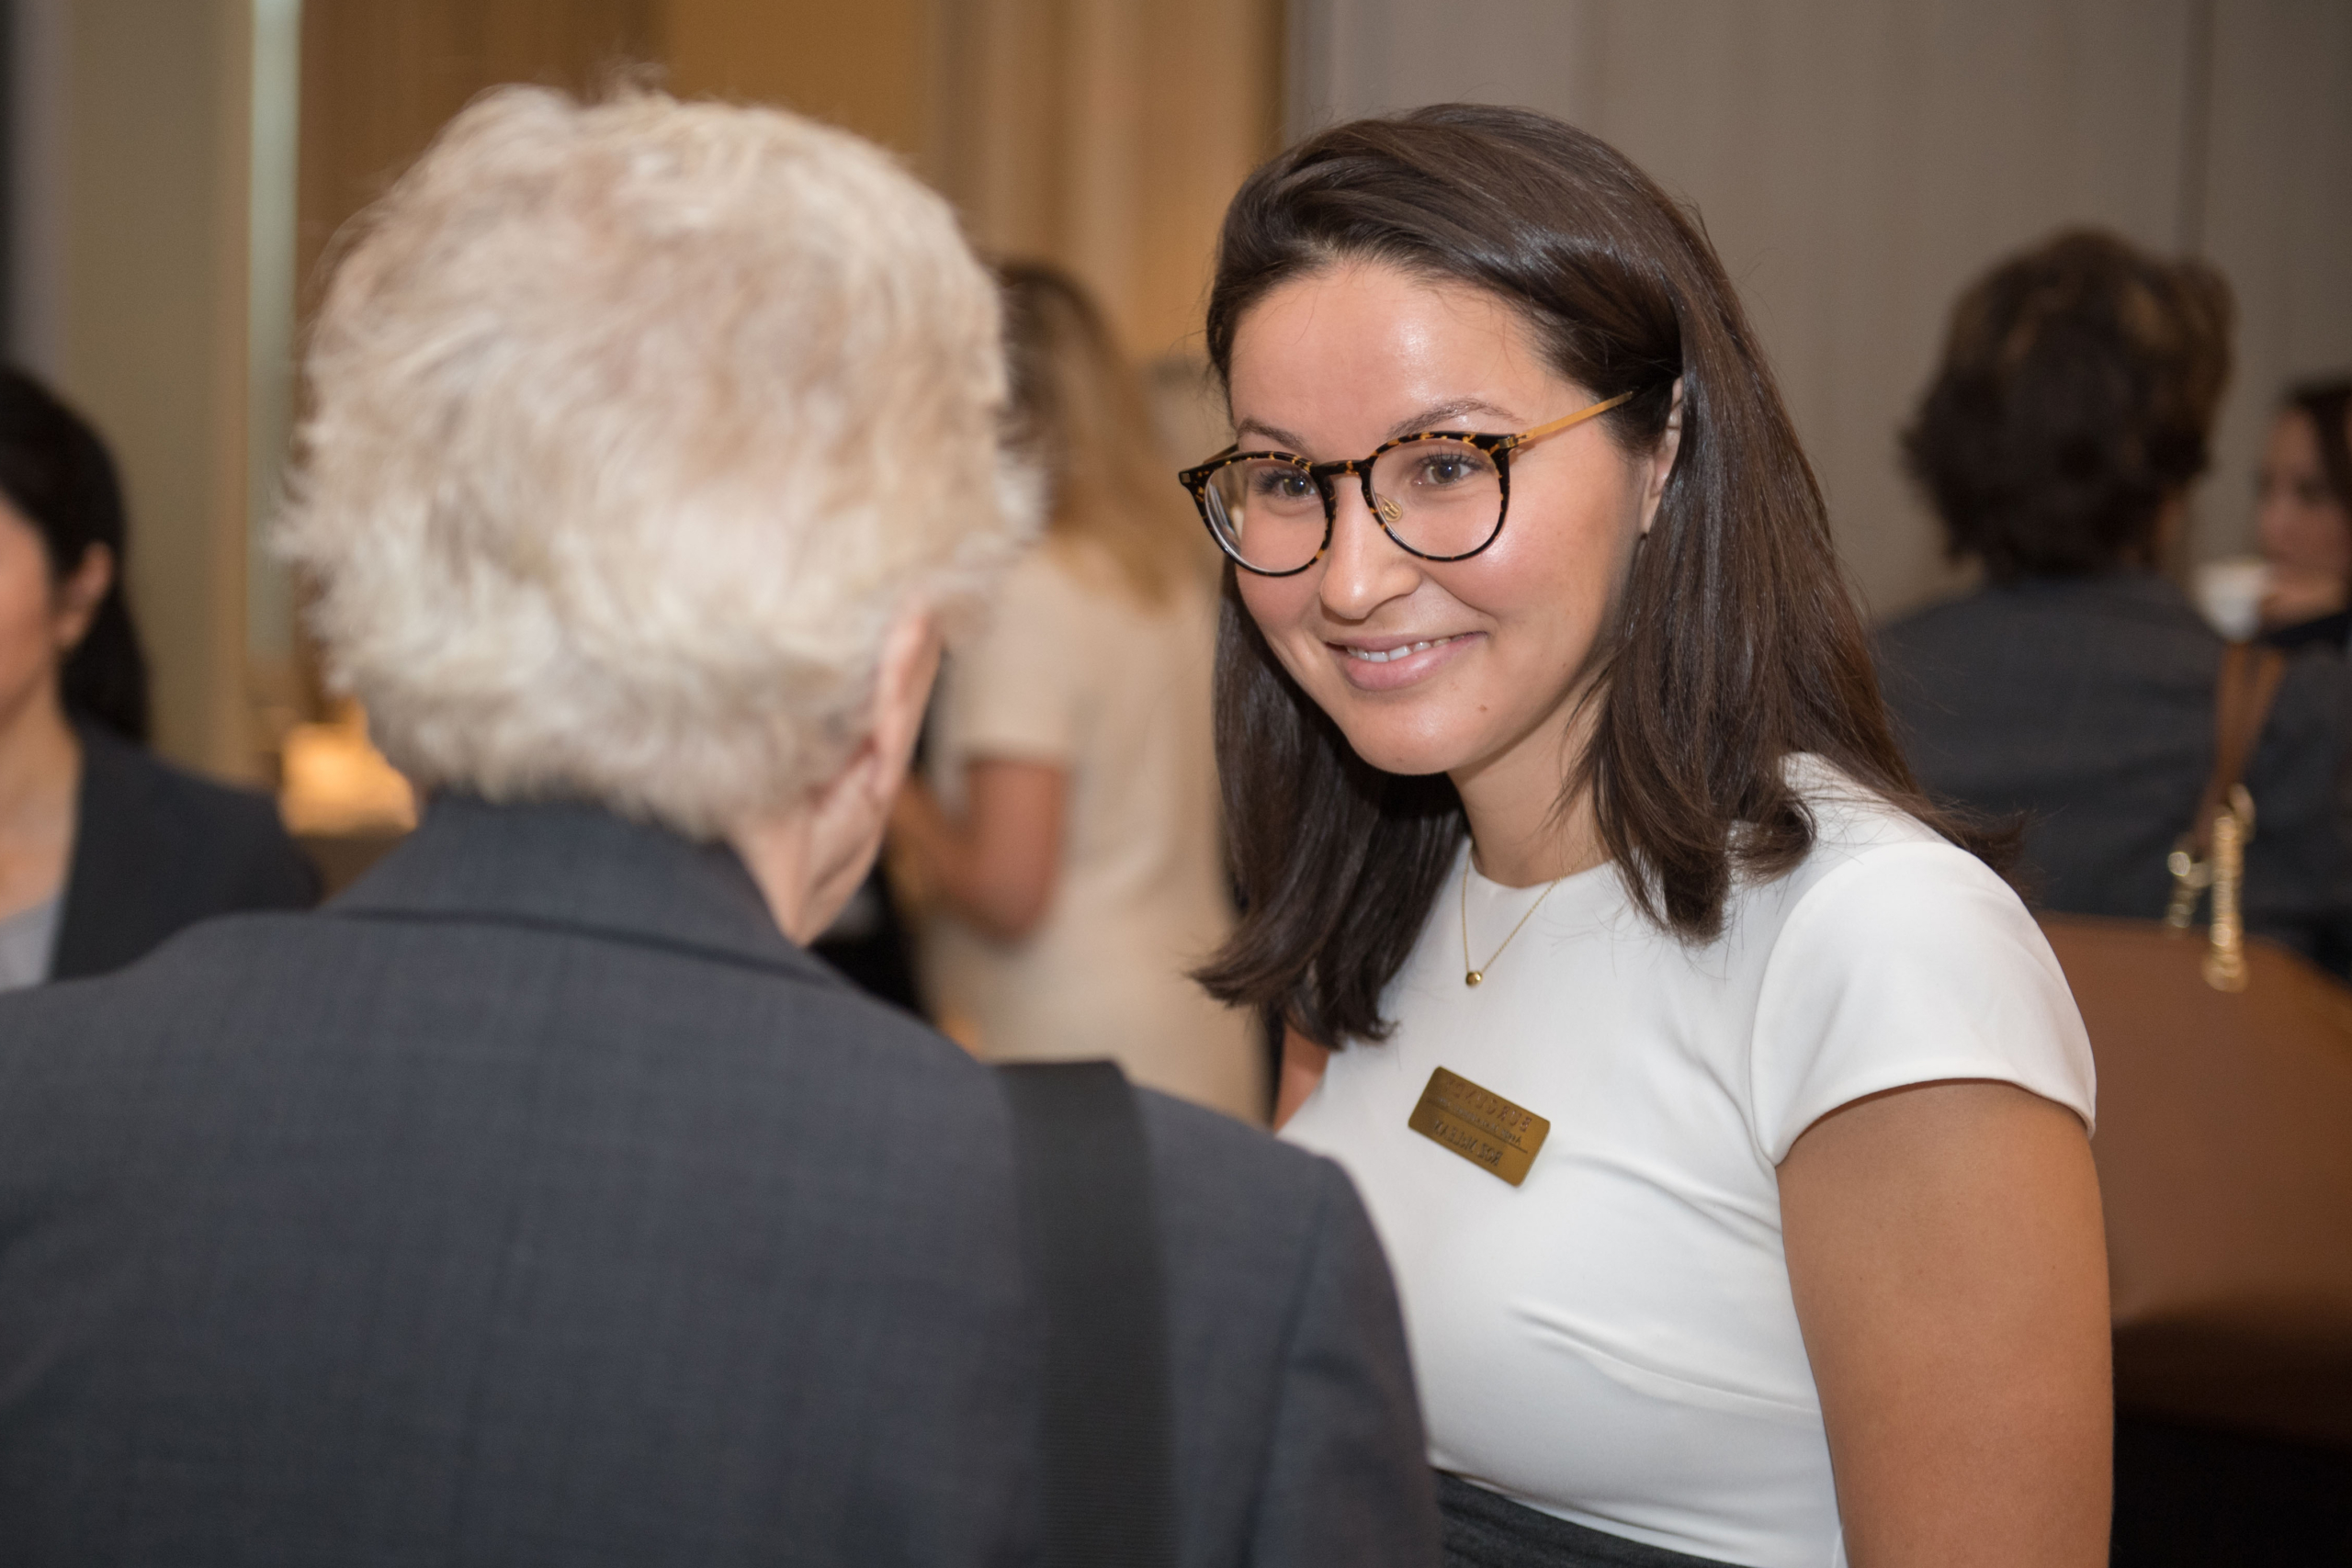 Roz McLean speaking with a client at a Women of Burgundy event